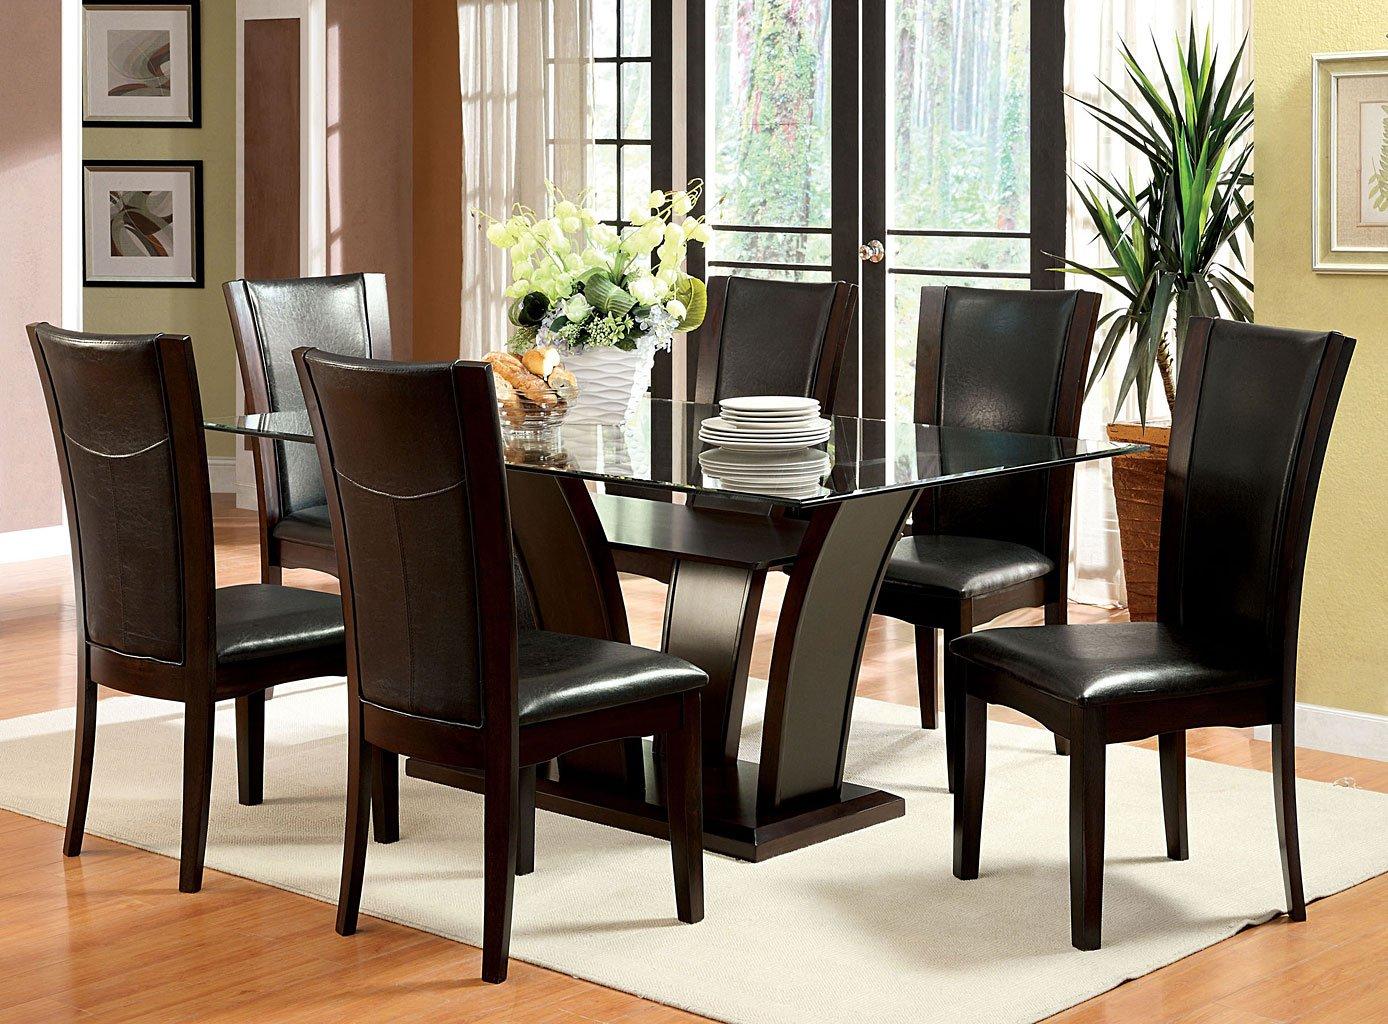 

    
Espresso Dining Table + 6 Espresso PU Chair by Crown Mark Camelia 1210T-4272-7pcs
